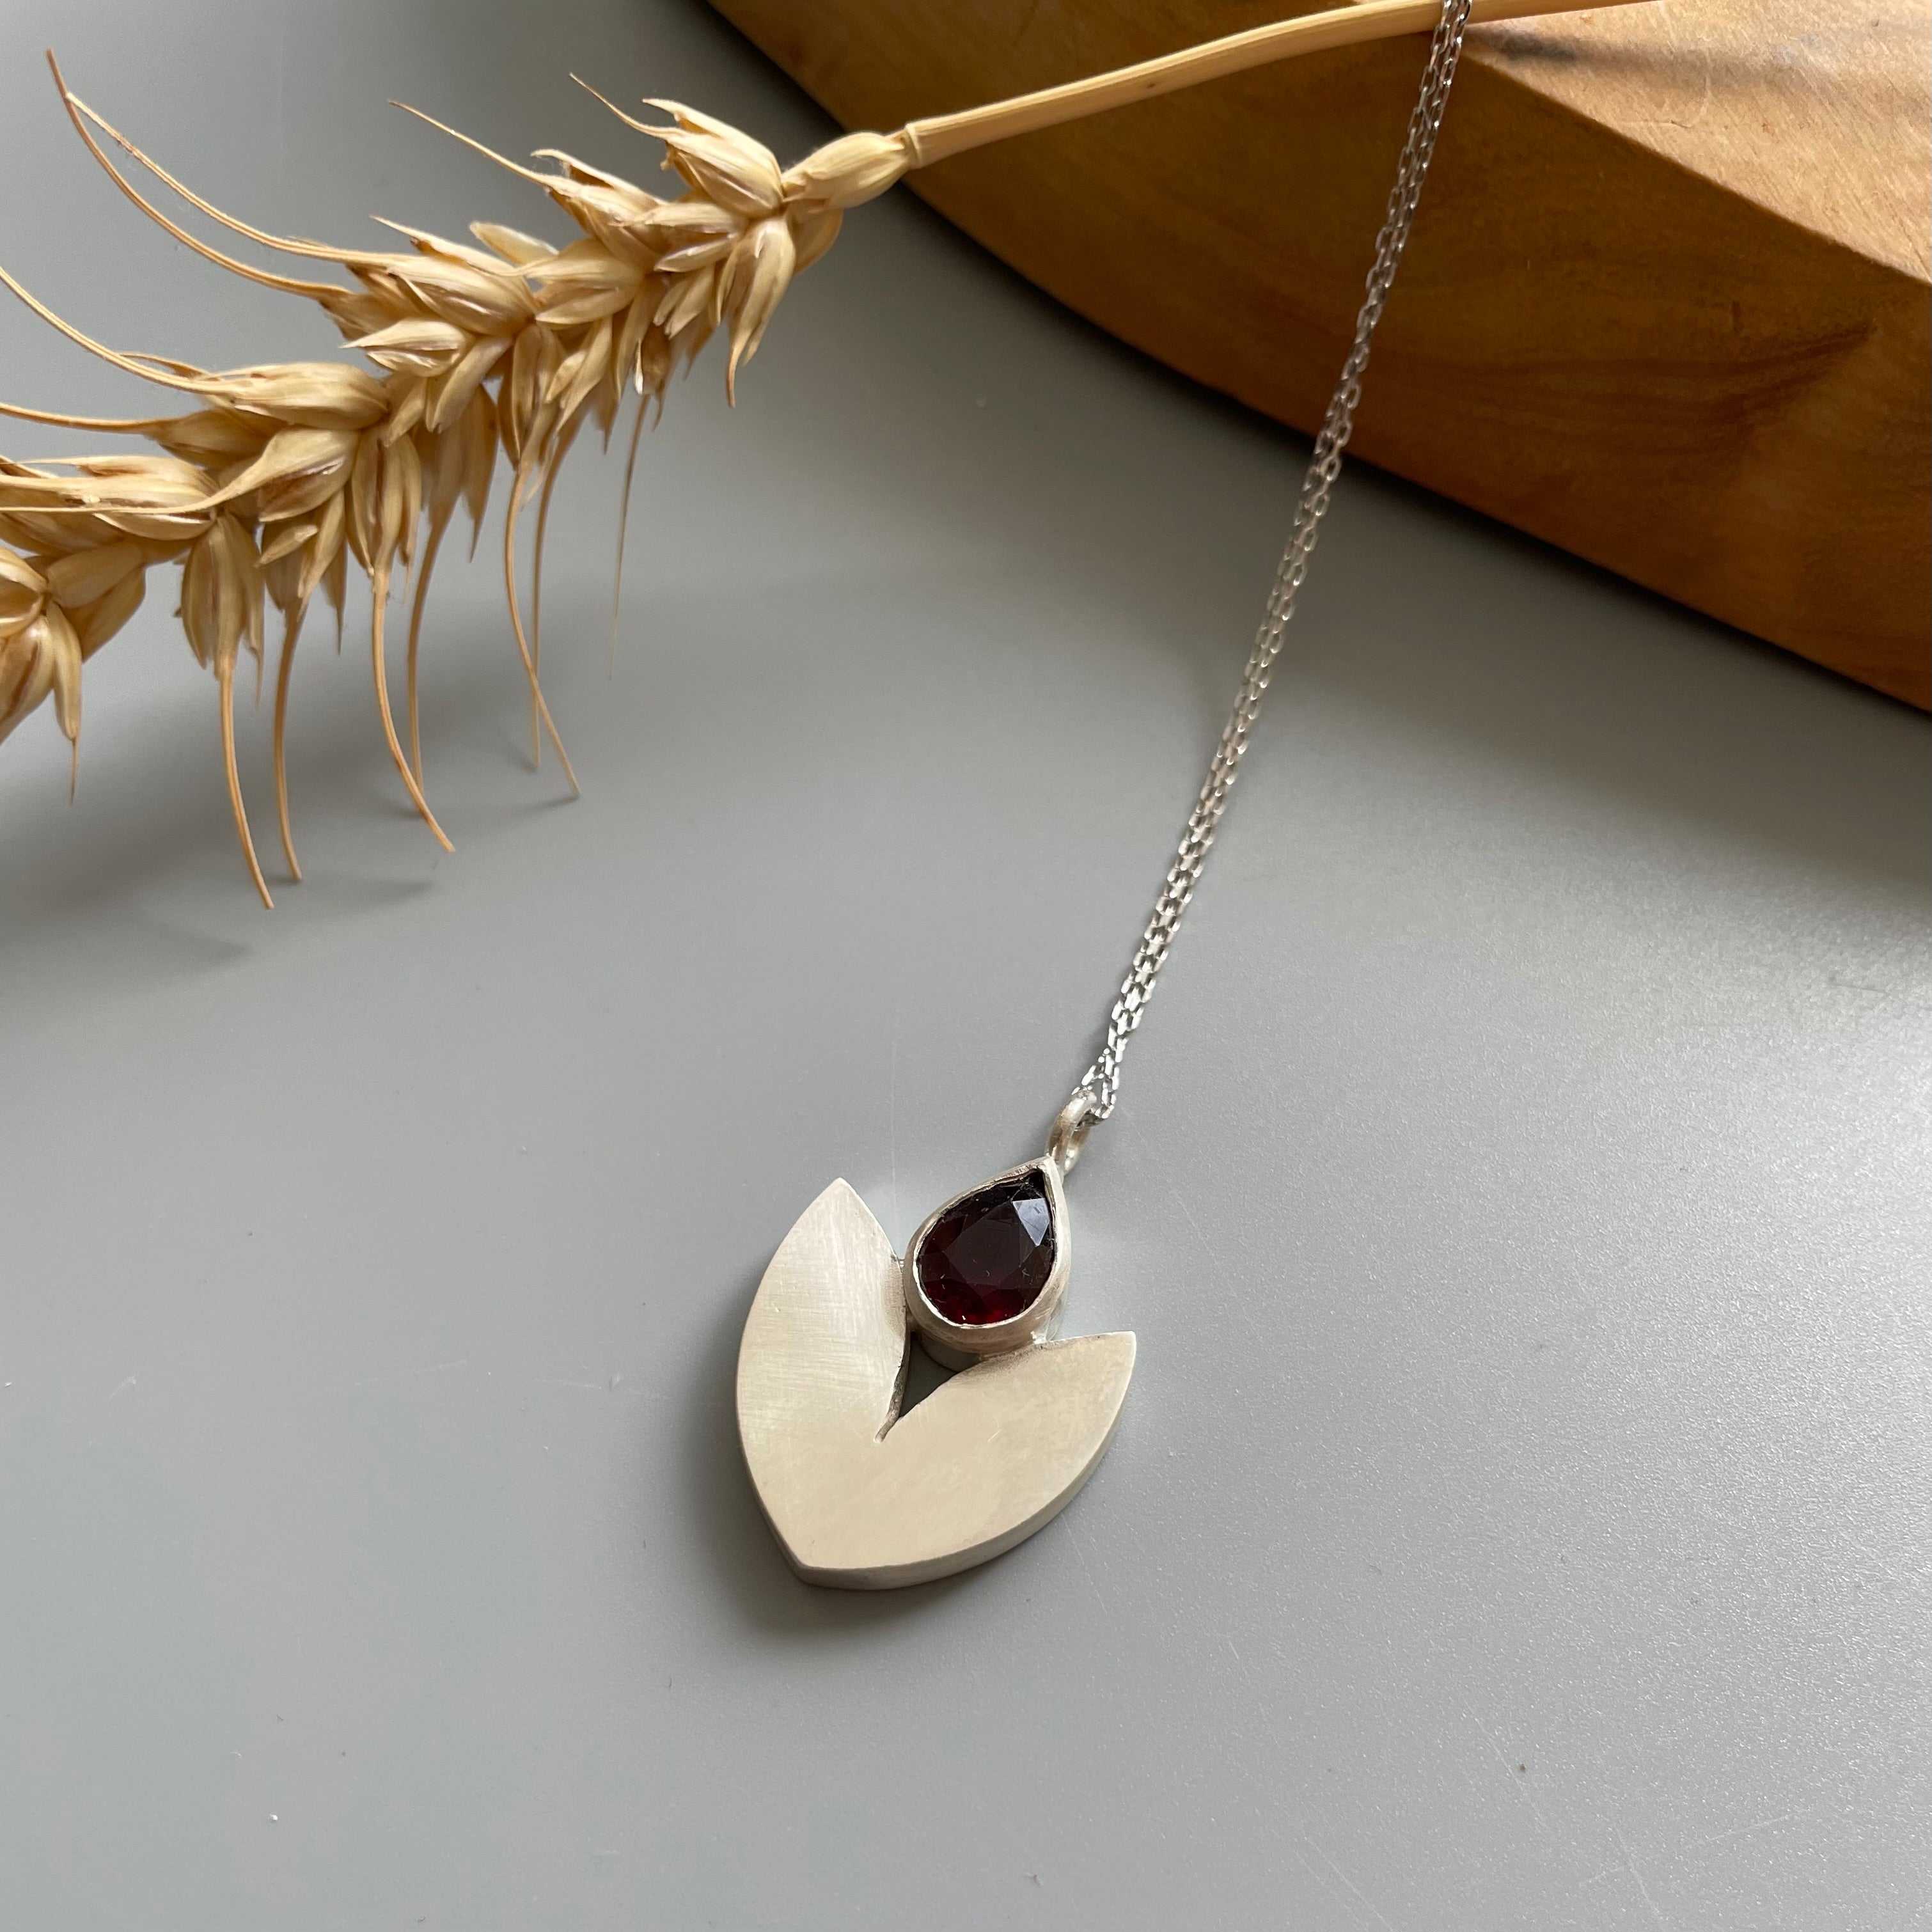 Handmade Silver Necklace with Natural Garnet